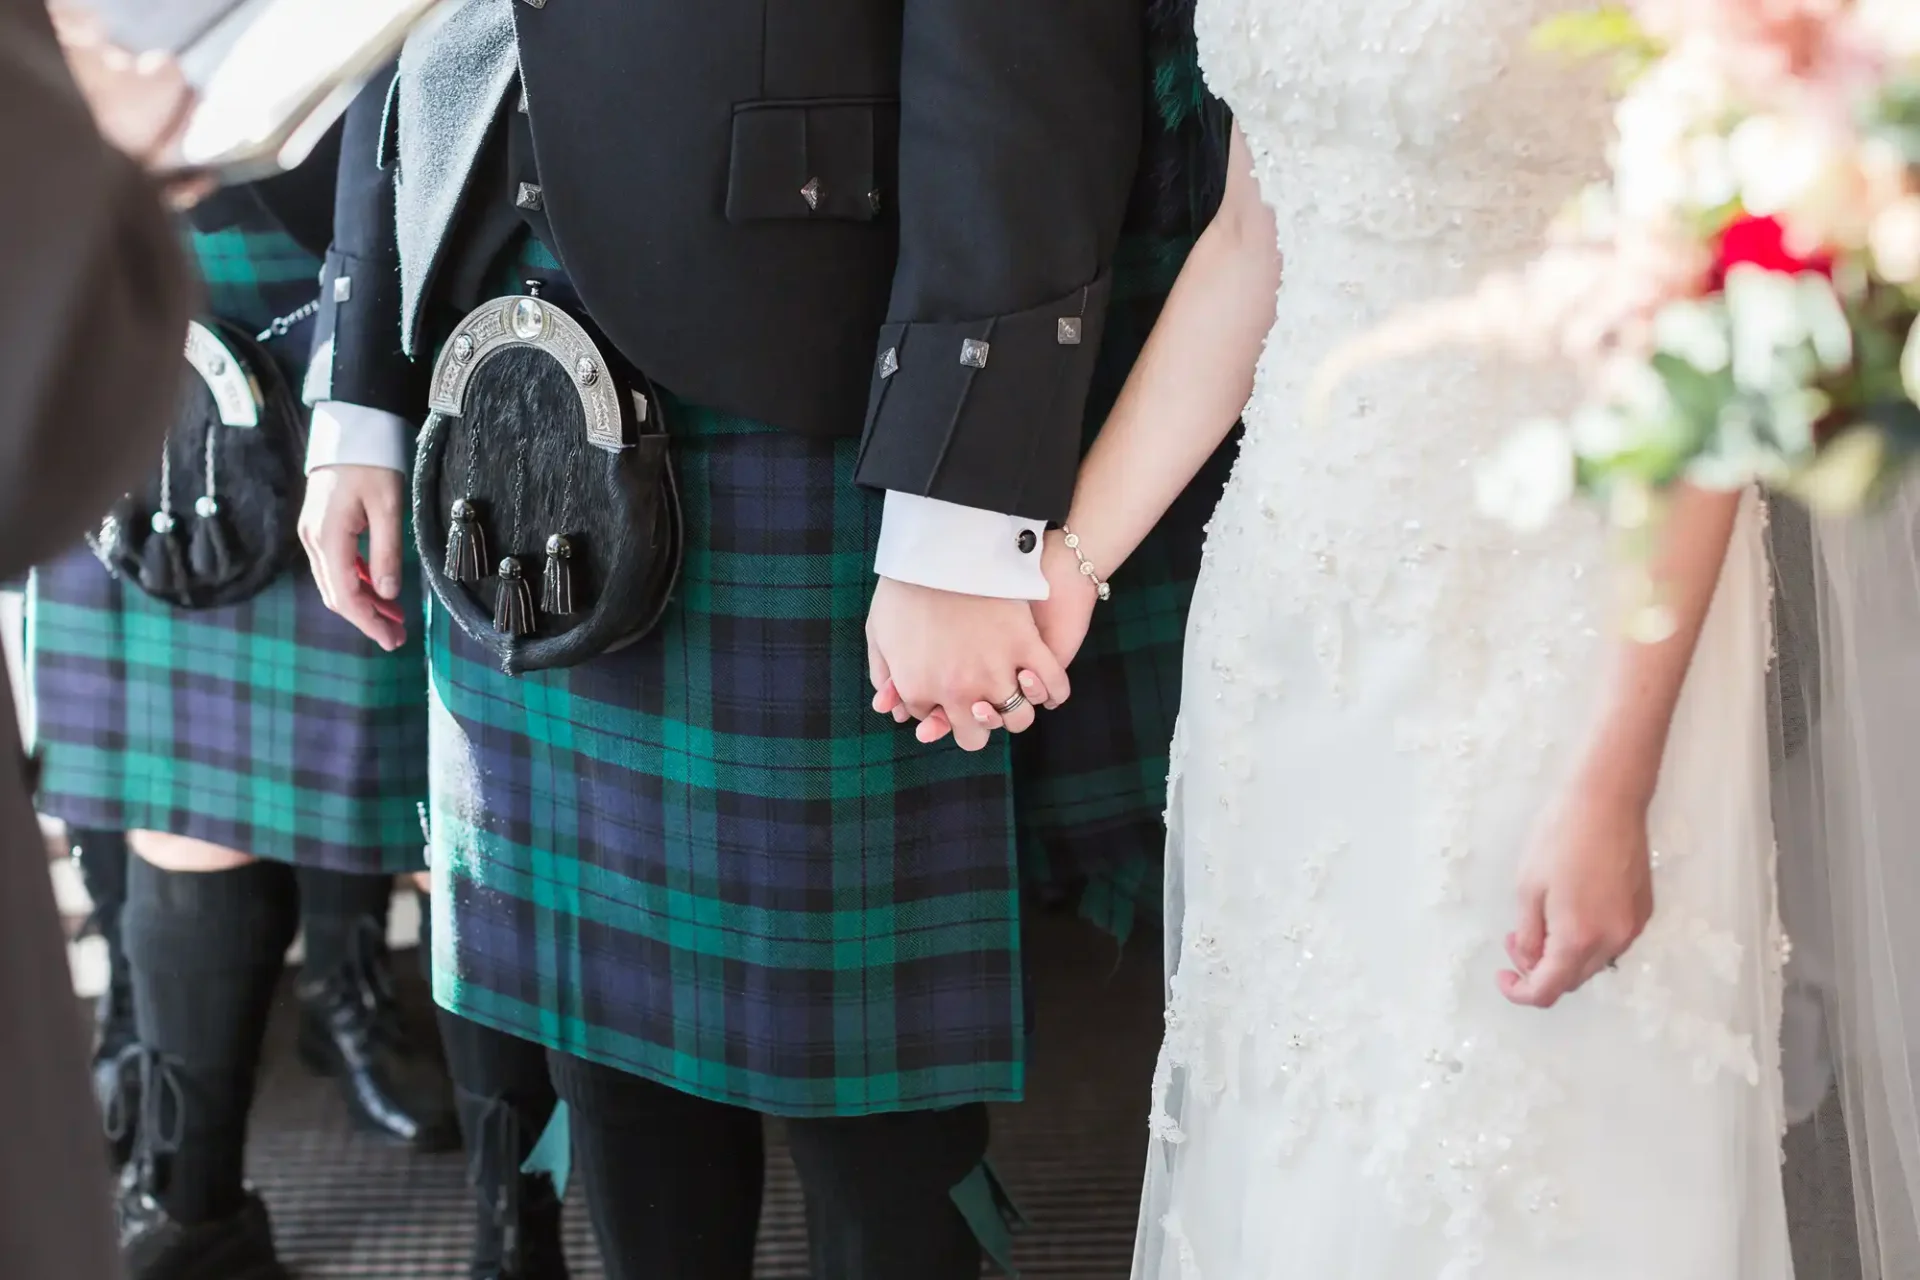 Bride and groom holding hands, the groom in a kilt and sporran, at a wedding ceremony.